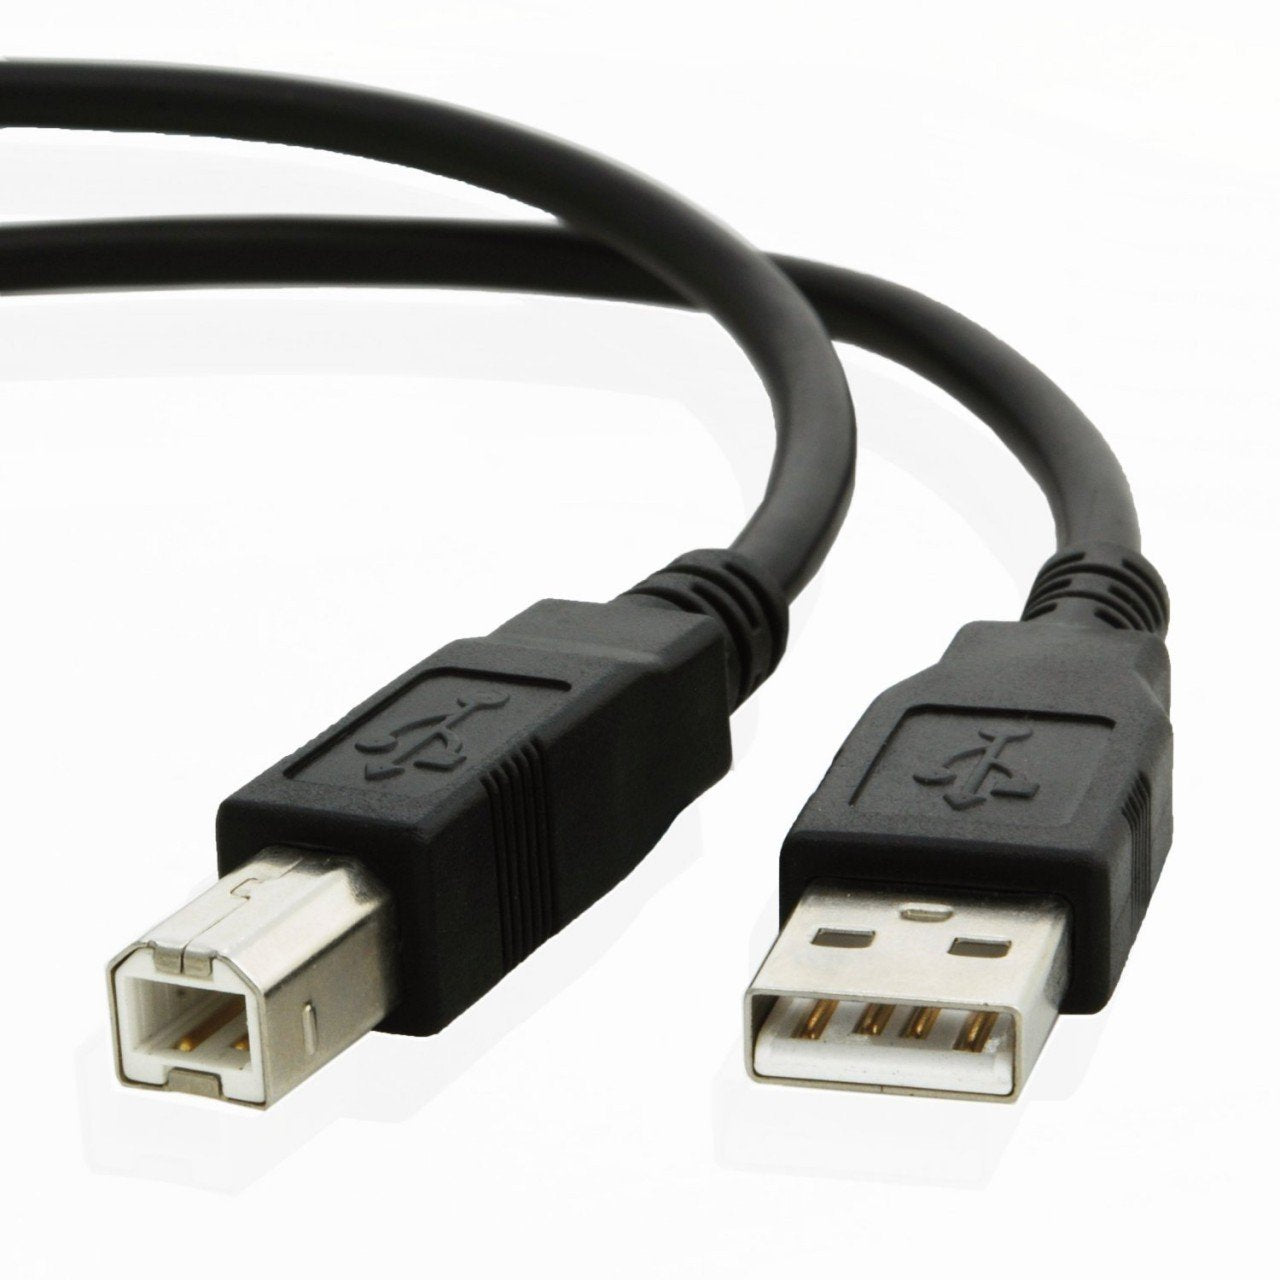 USB cable for Canon PIXMA TS5150